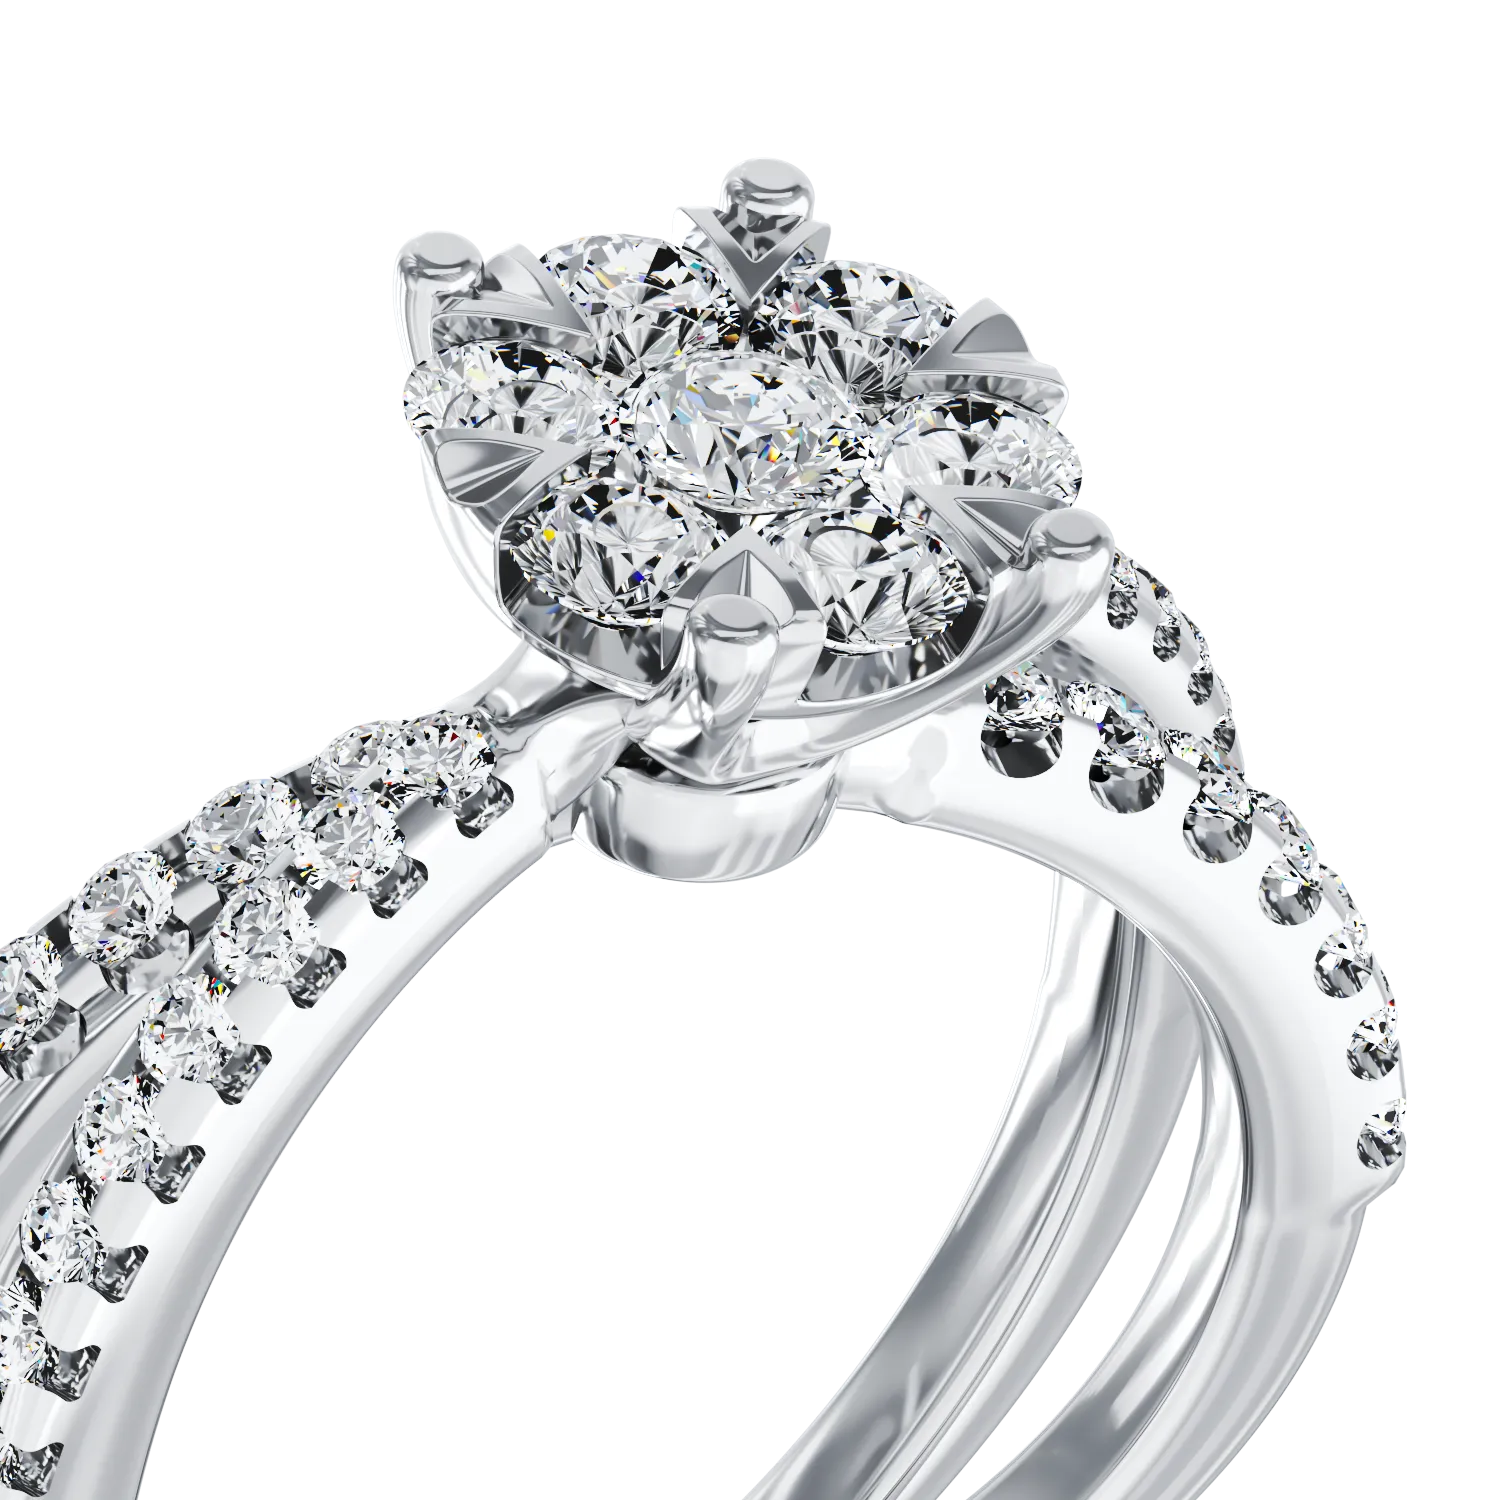 18K white gold engagement ring with diamonds of 0.6ct